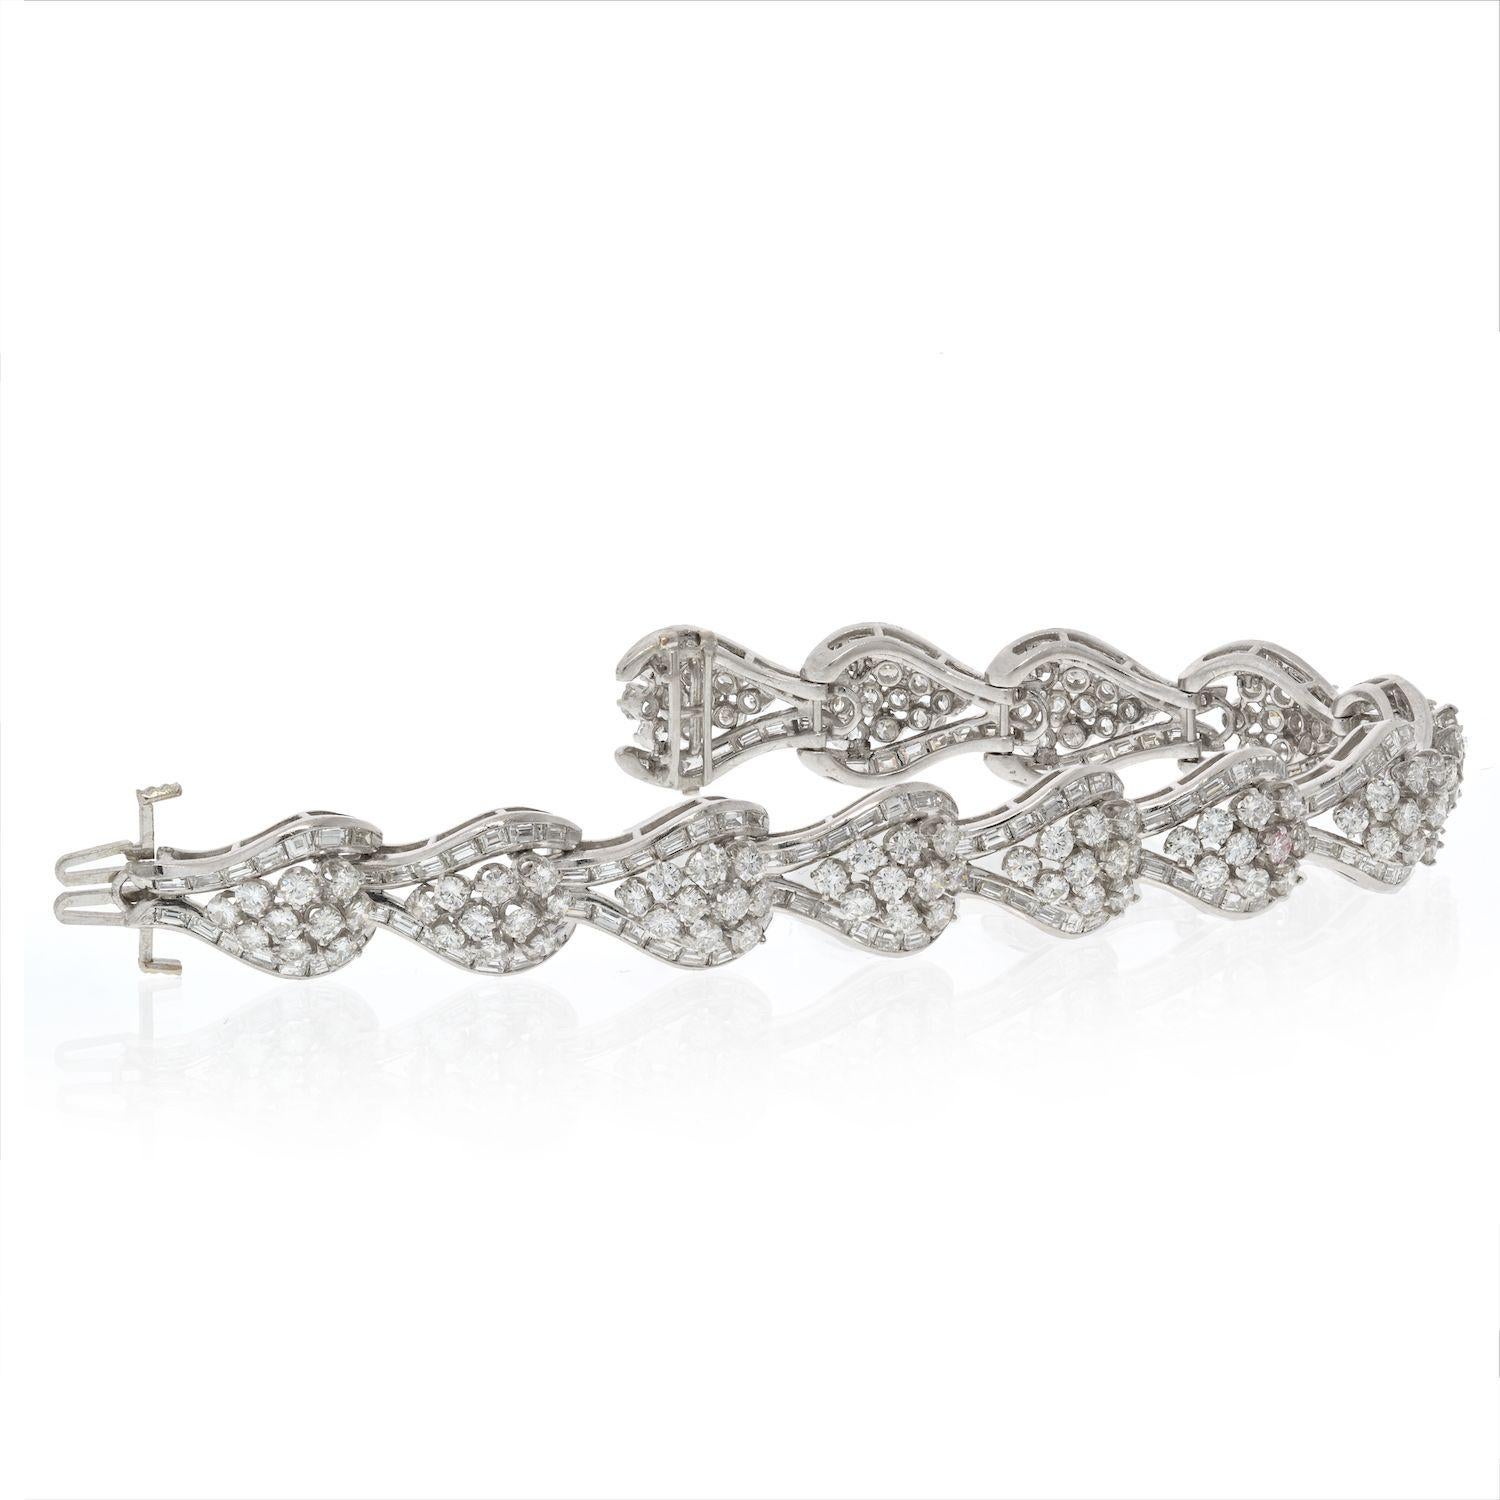 Crafted in 1950's this platinum diamond bracelet is a pleasure to own and to wear. It is made of durable platinum, mounted with gleaming round brilliant cut diamonds of clean white clarity, framed with slick baguette cuts. 
This bracelet has a